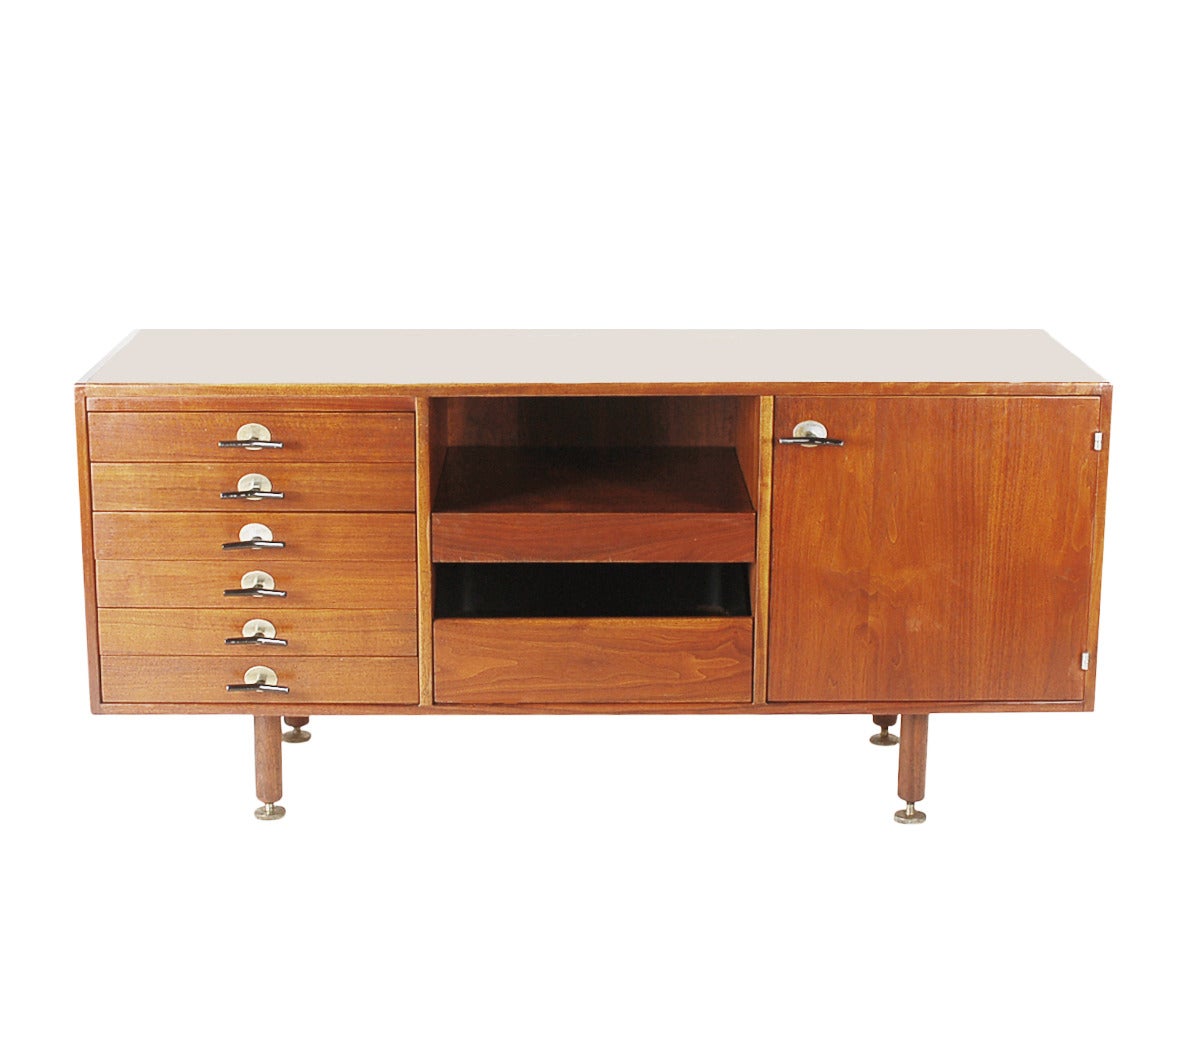 An extremely hard to find cabinet designed by Jens Risom. This unique configuration provides plenty of storage. Gorgeous walnut wood with black signature Y pulls.